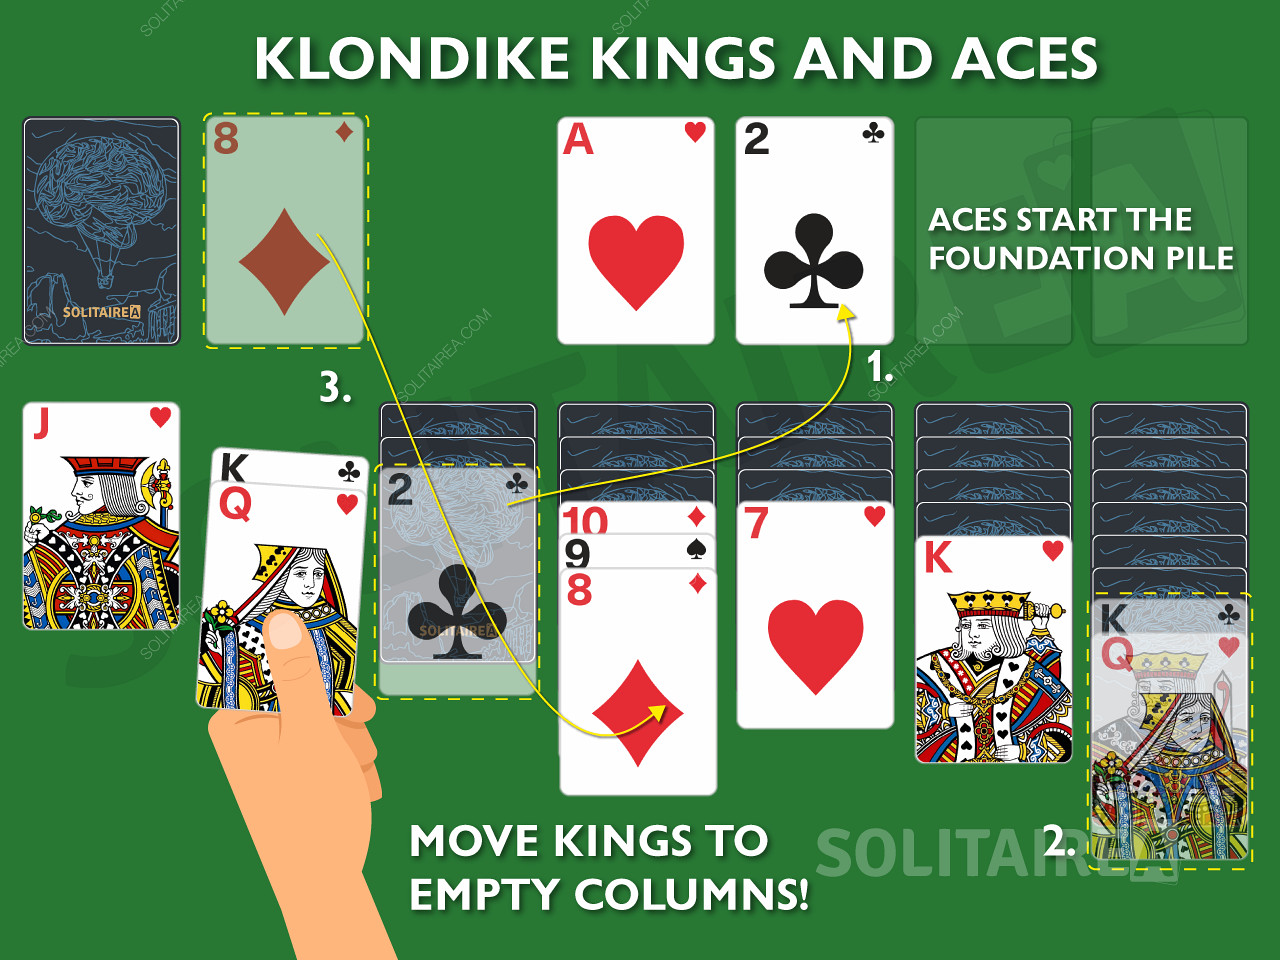 Key Points and Klondike Solitaire Kings and Aces 